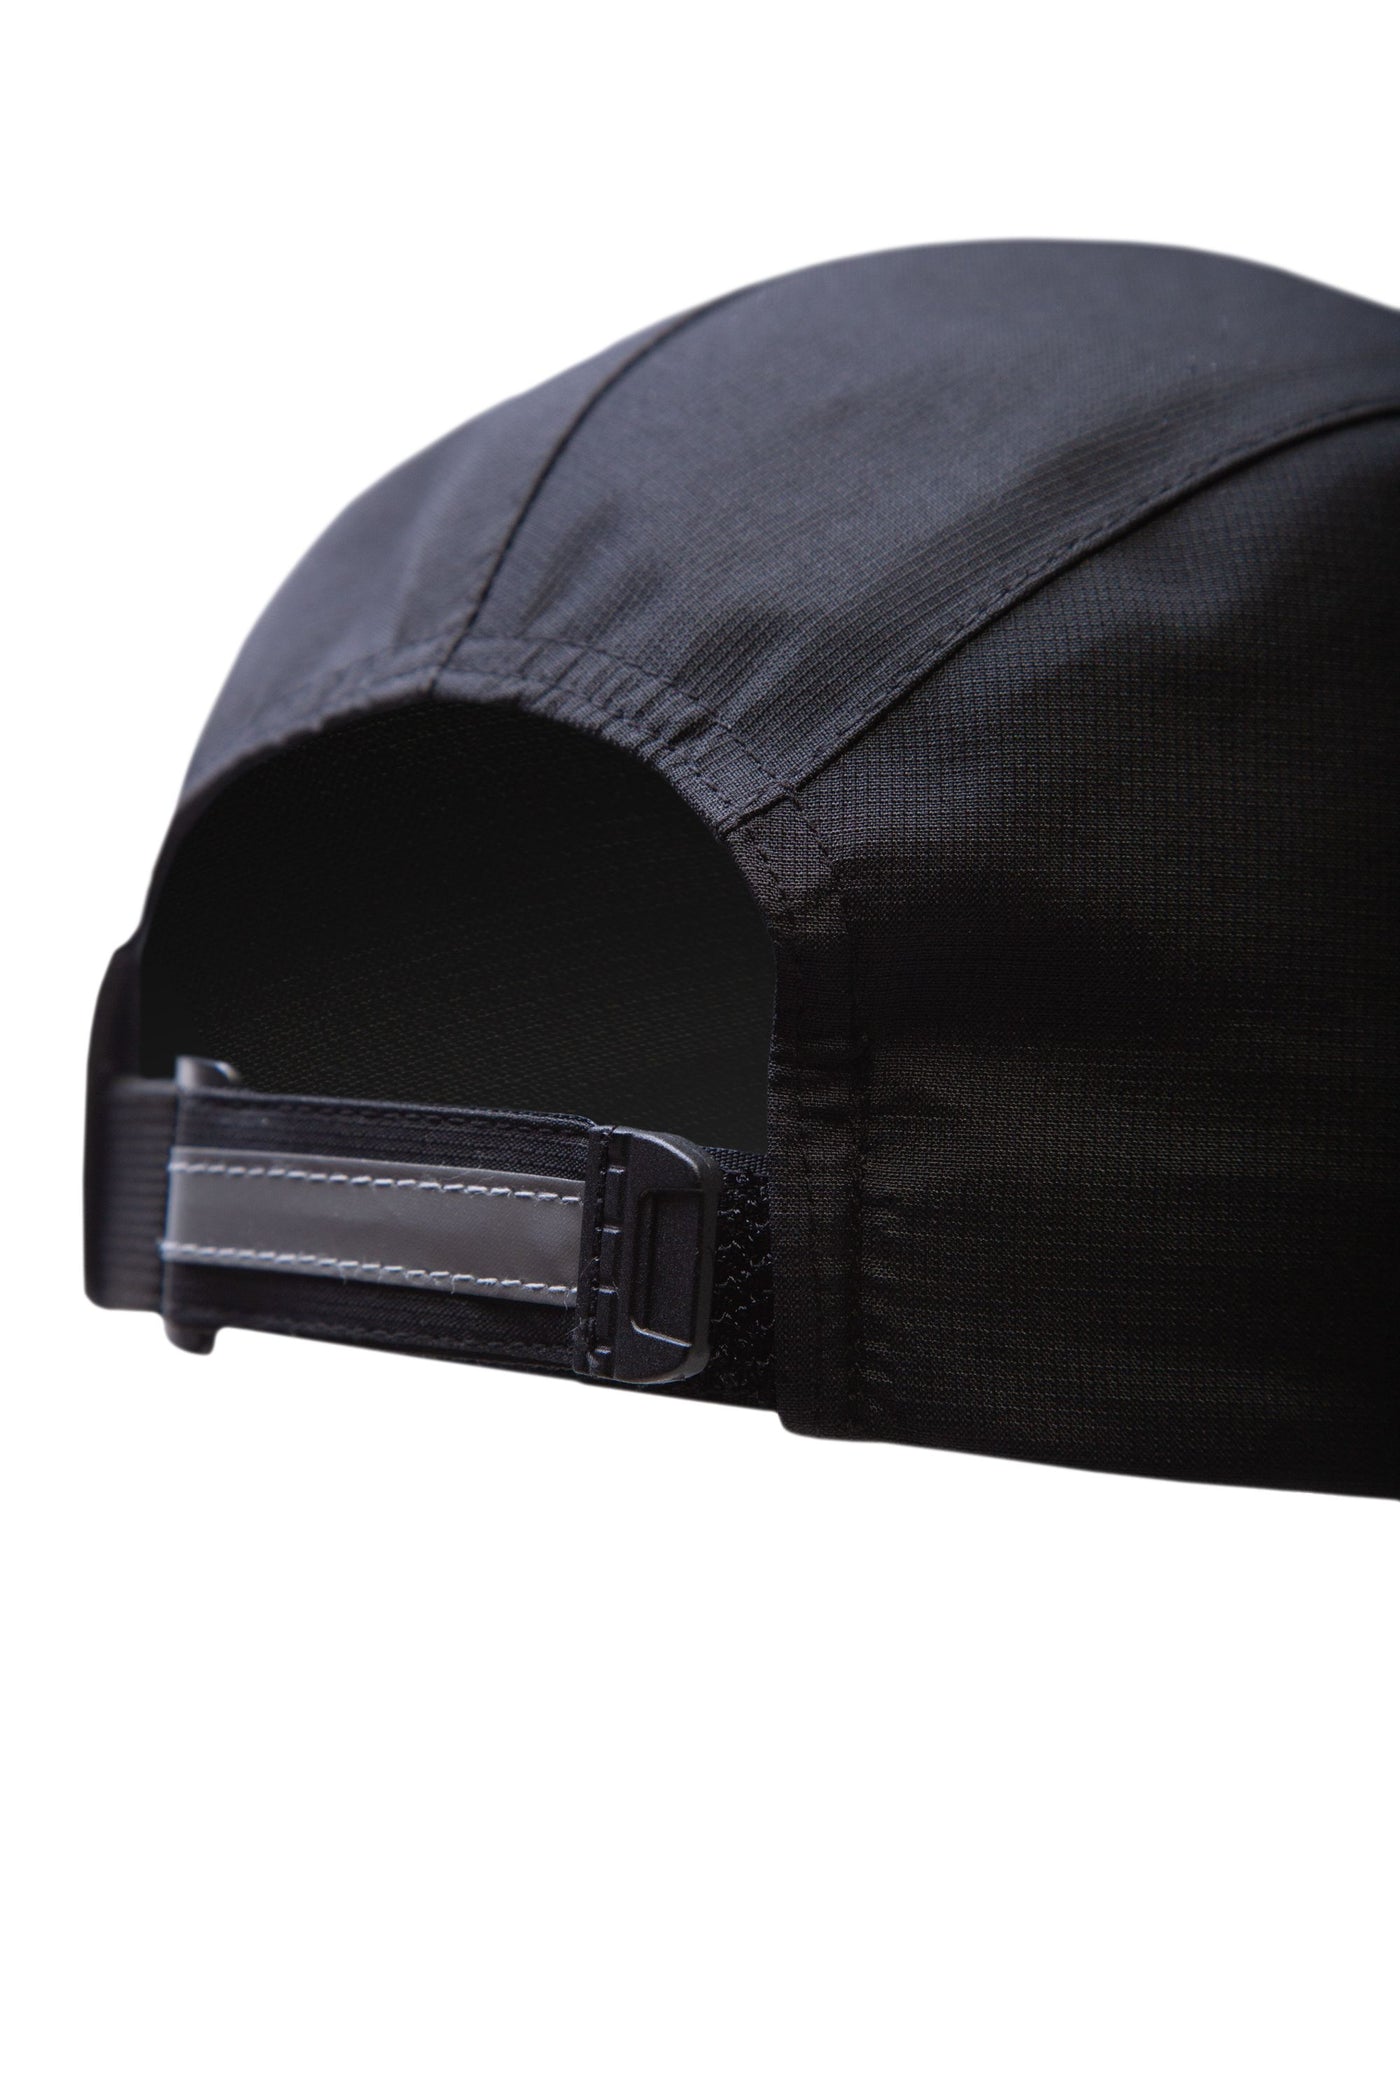 RonHill Fortify Cap - All Black